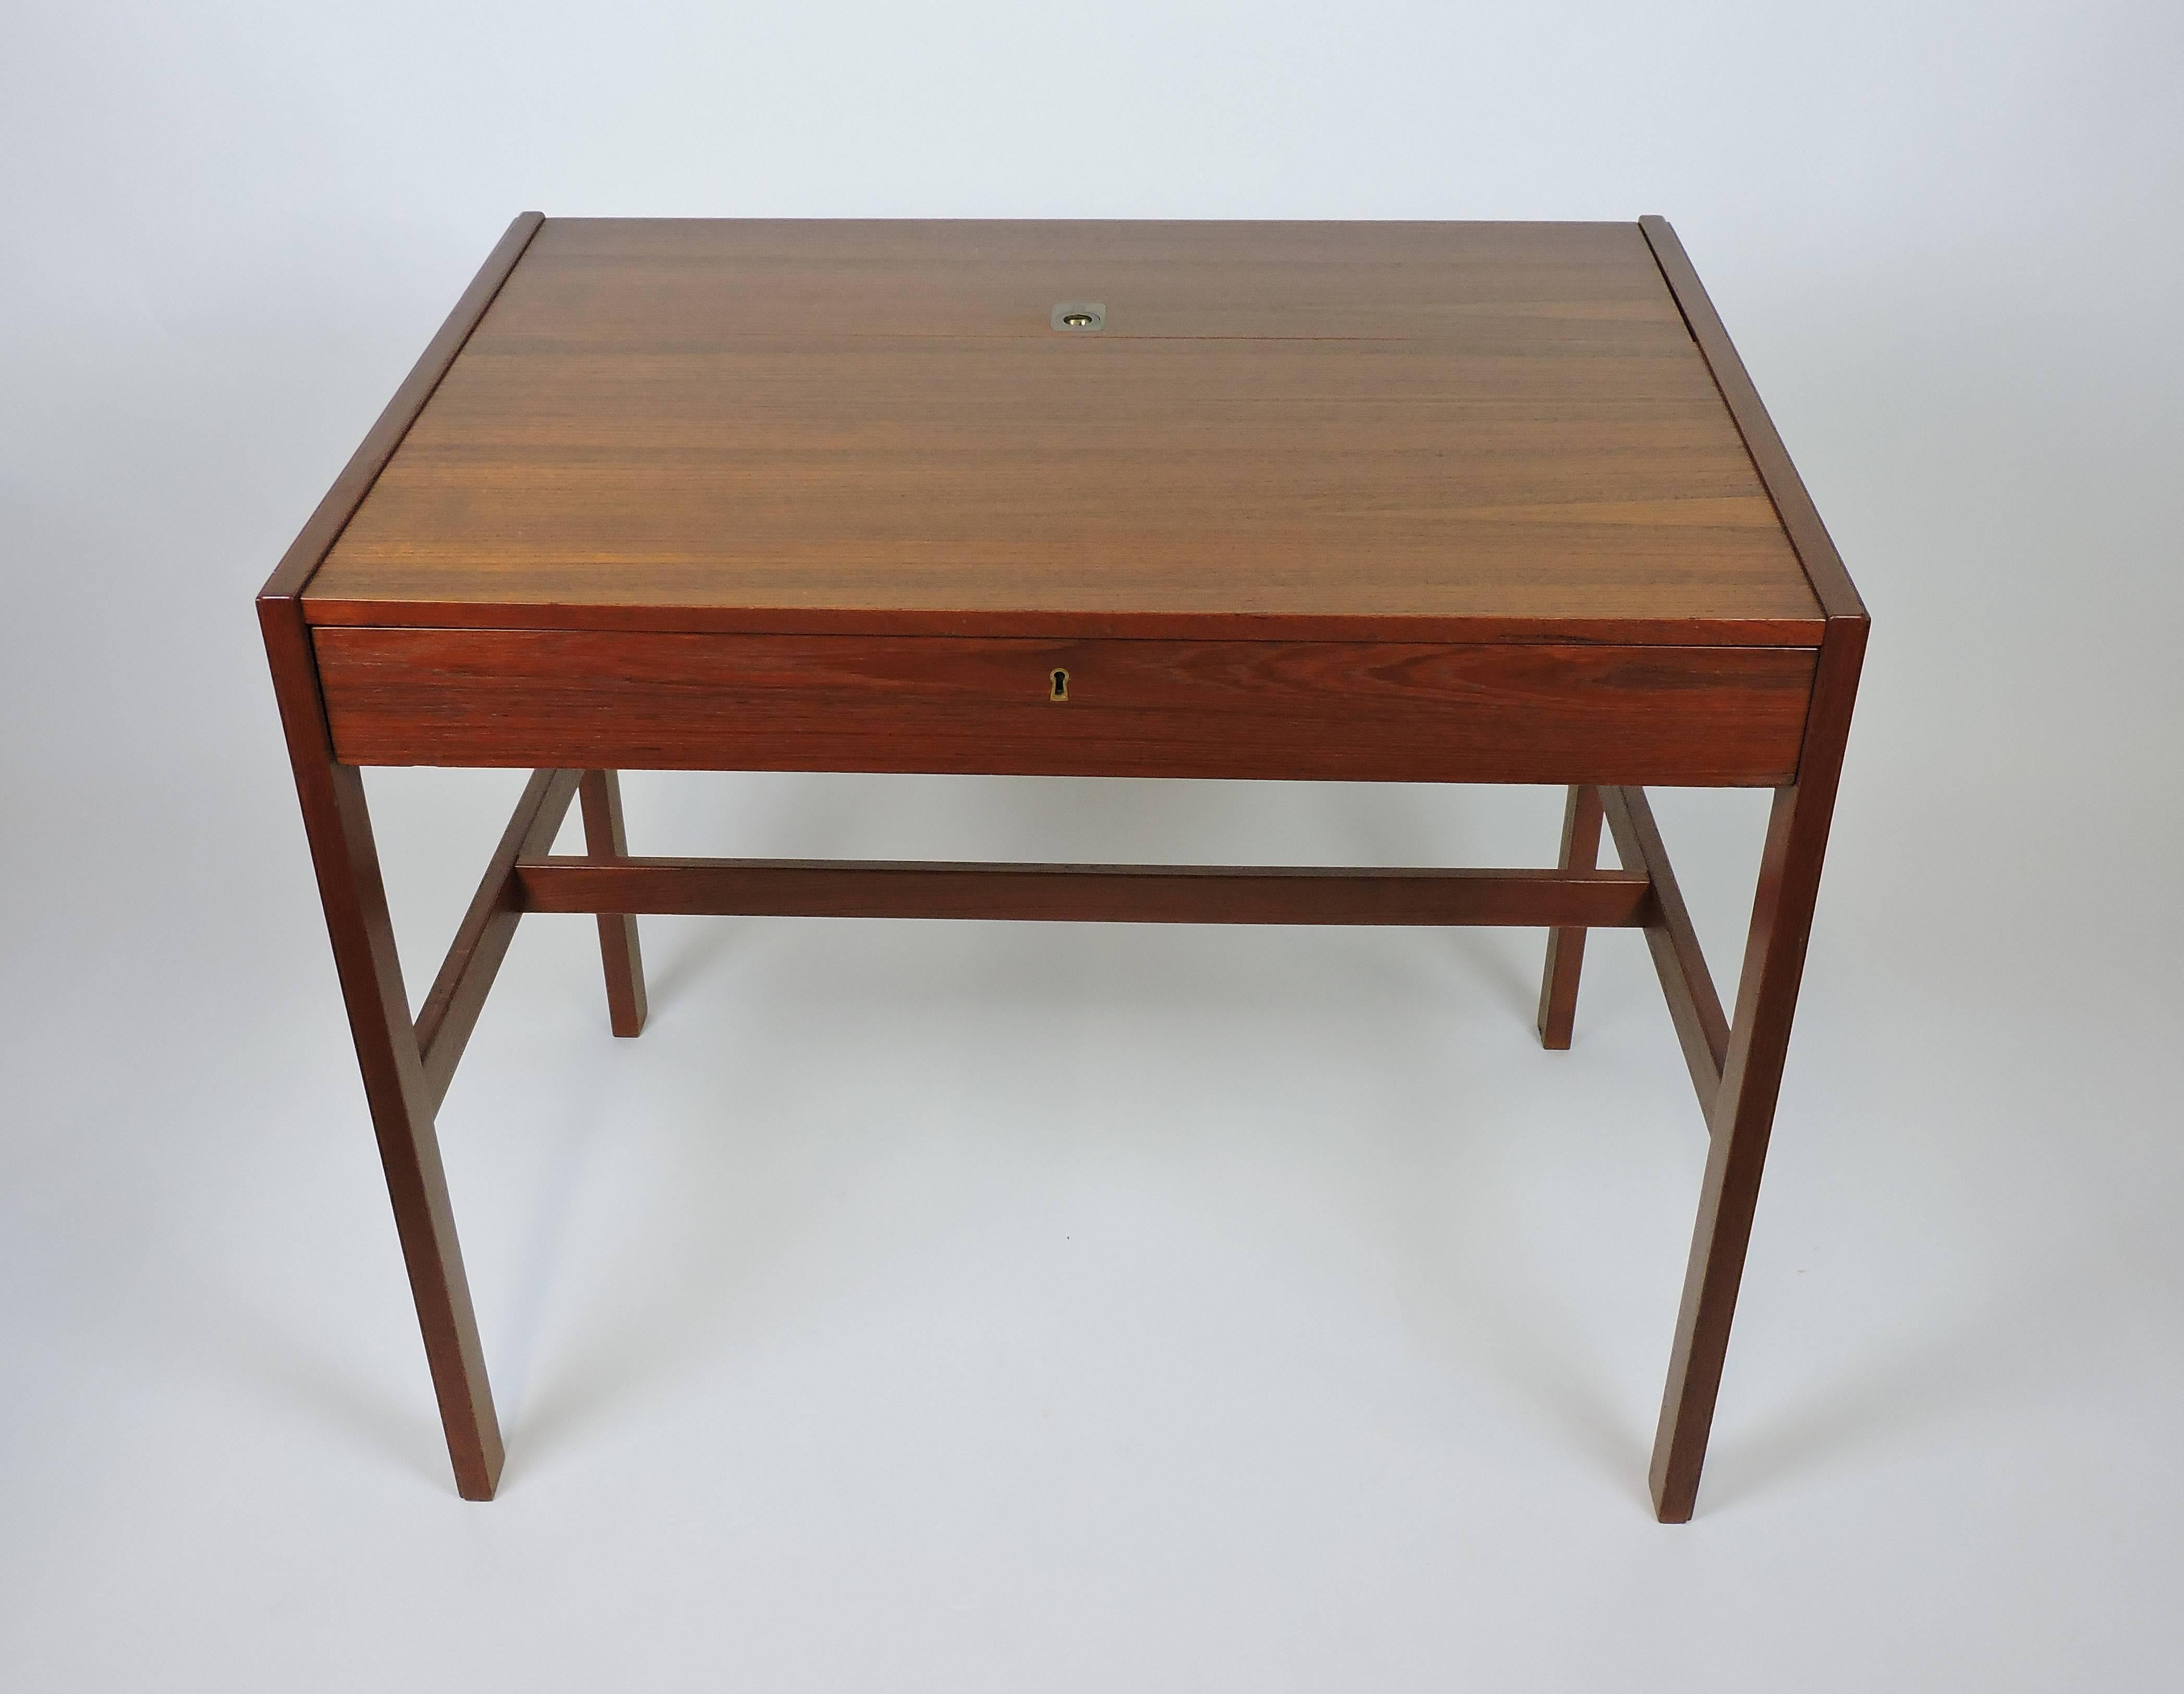 Simple and elegant hard-to-find teak desk designed by Arne Wahl Iversen and made in Denmark. This desk can also be used as a dressing table, and has wonderful features that include a locking pull out drawer, a large writing surface, and a hidden